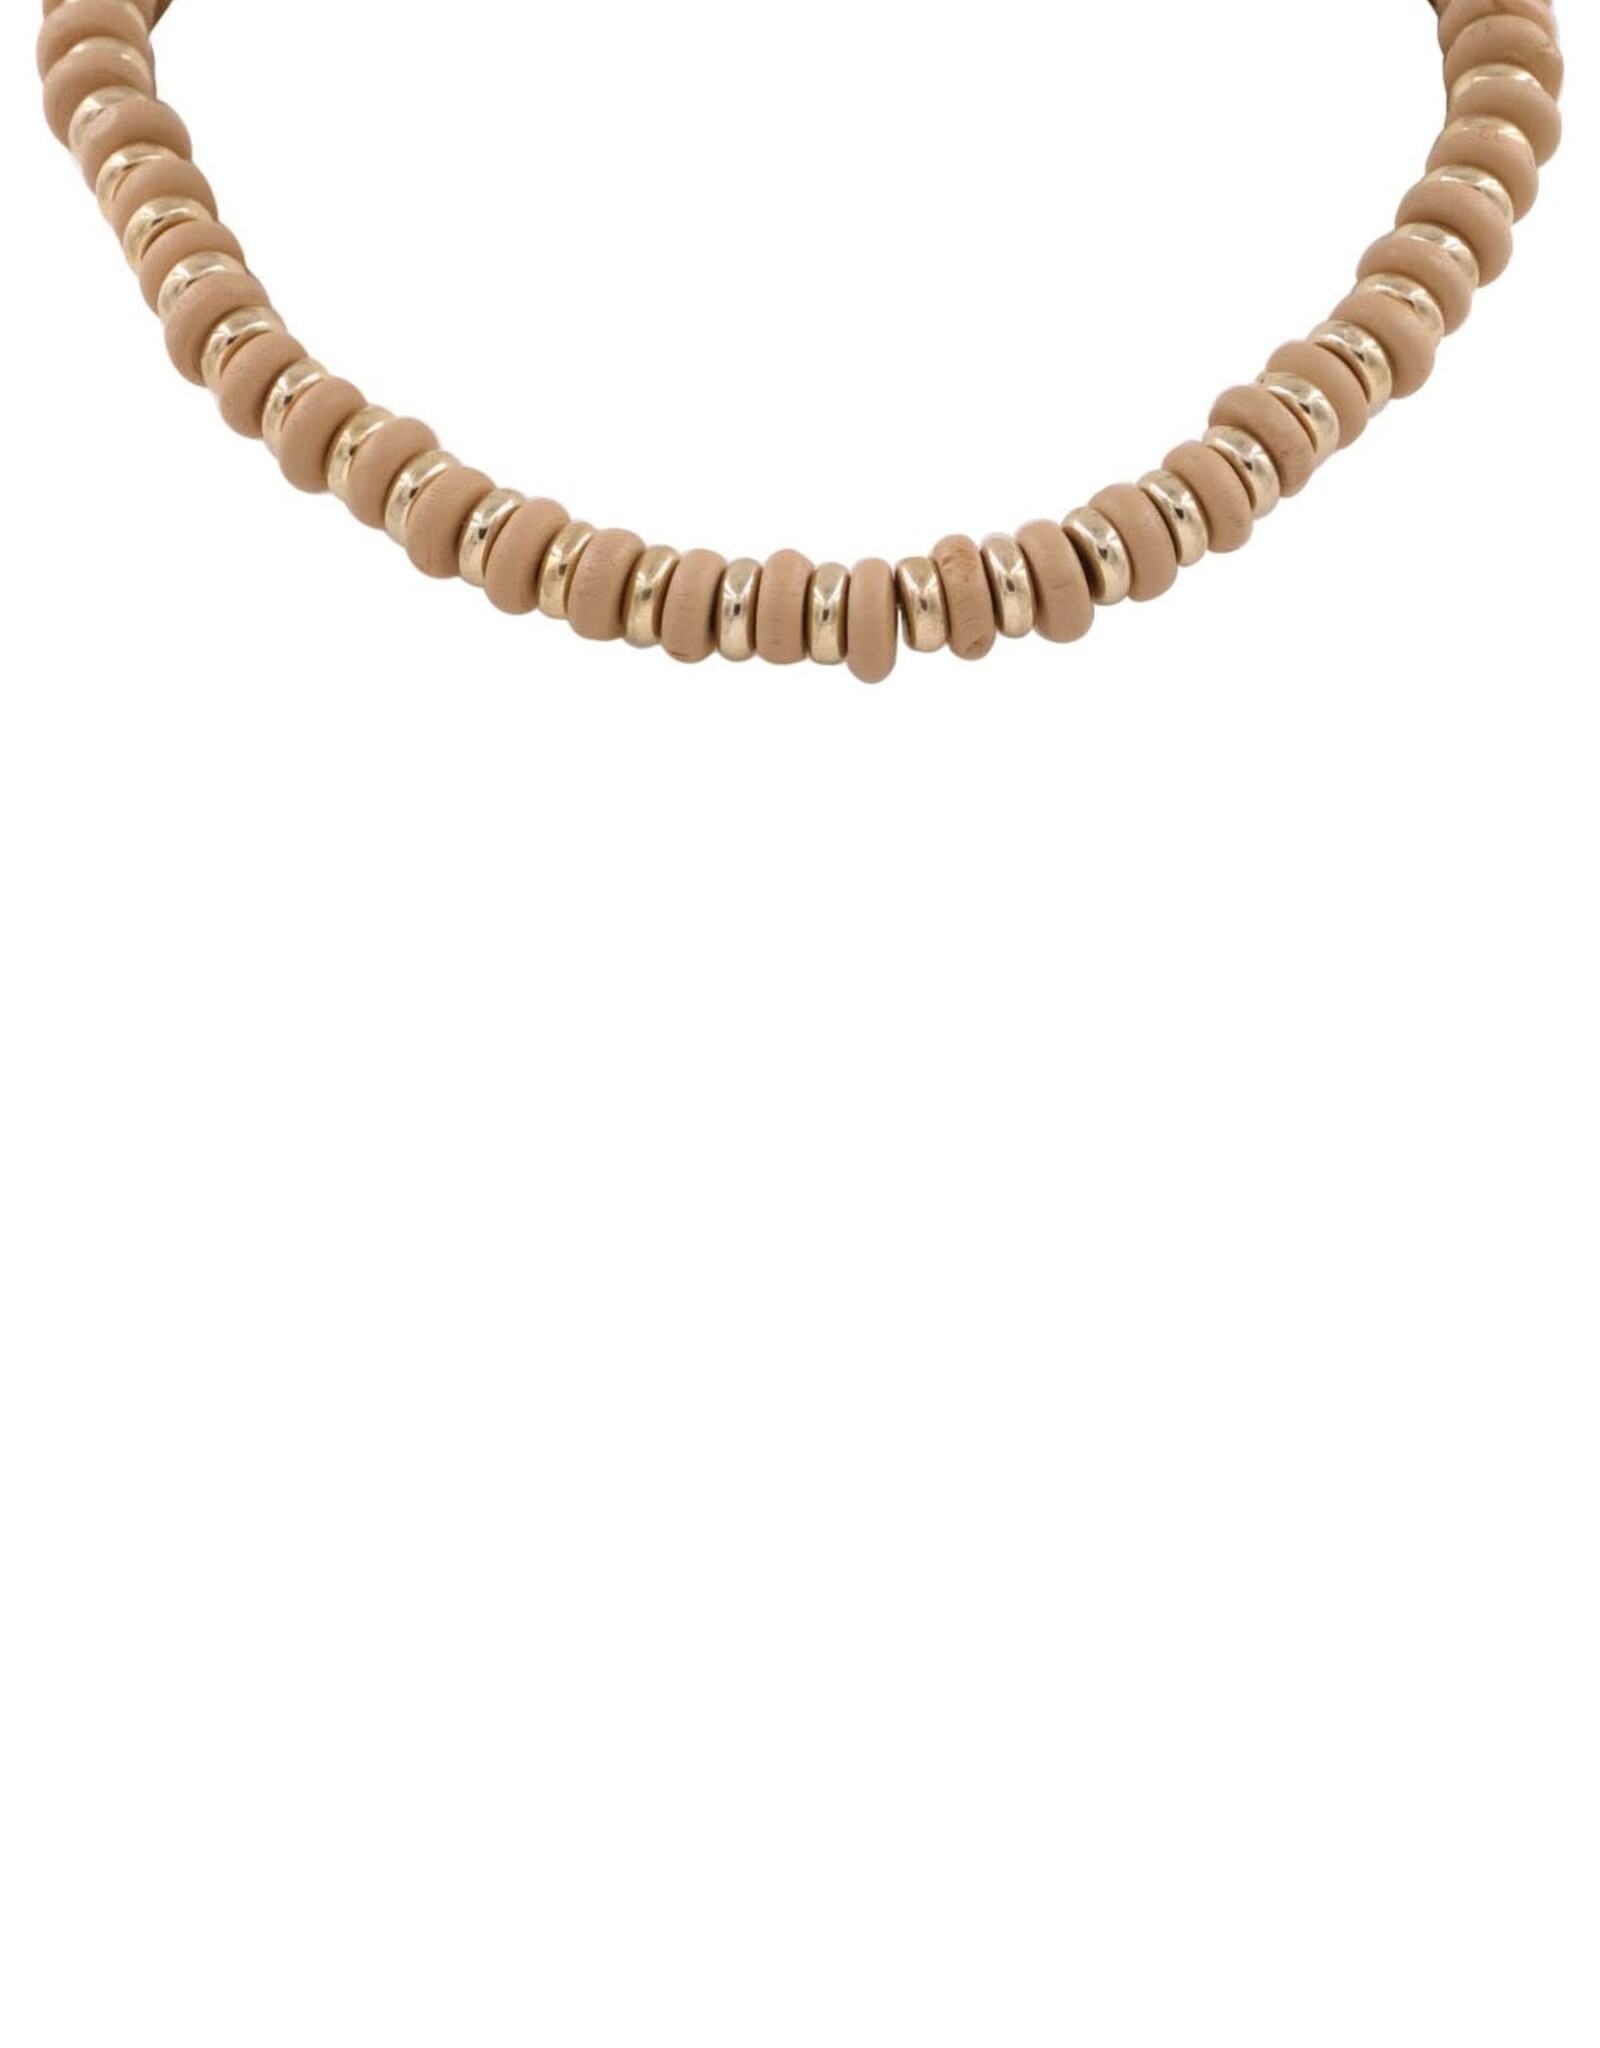 Nude Wood & Gold Bead Necklace